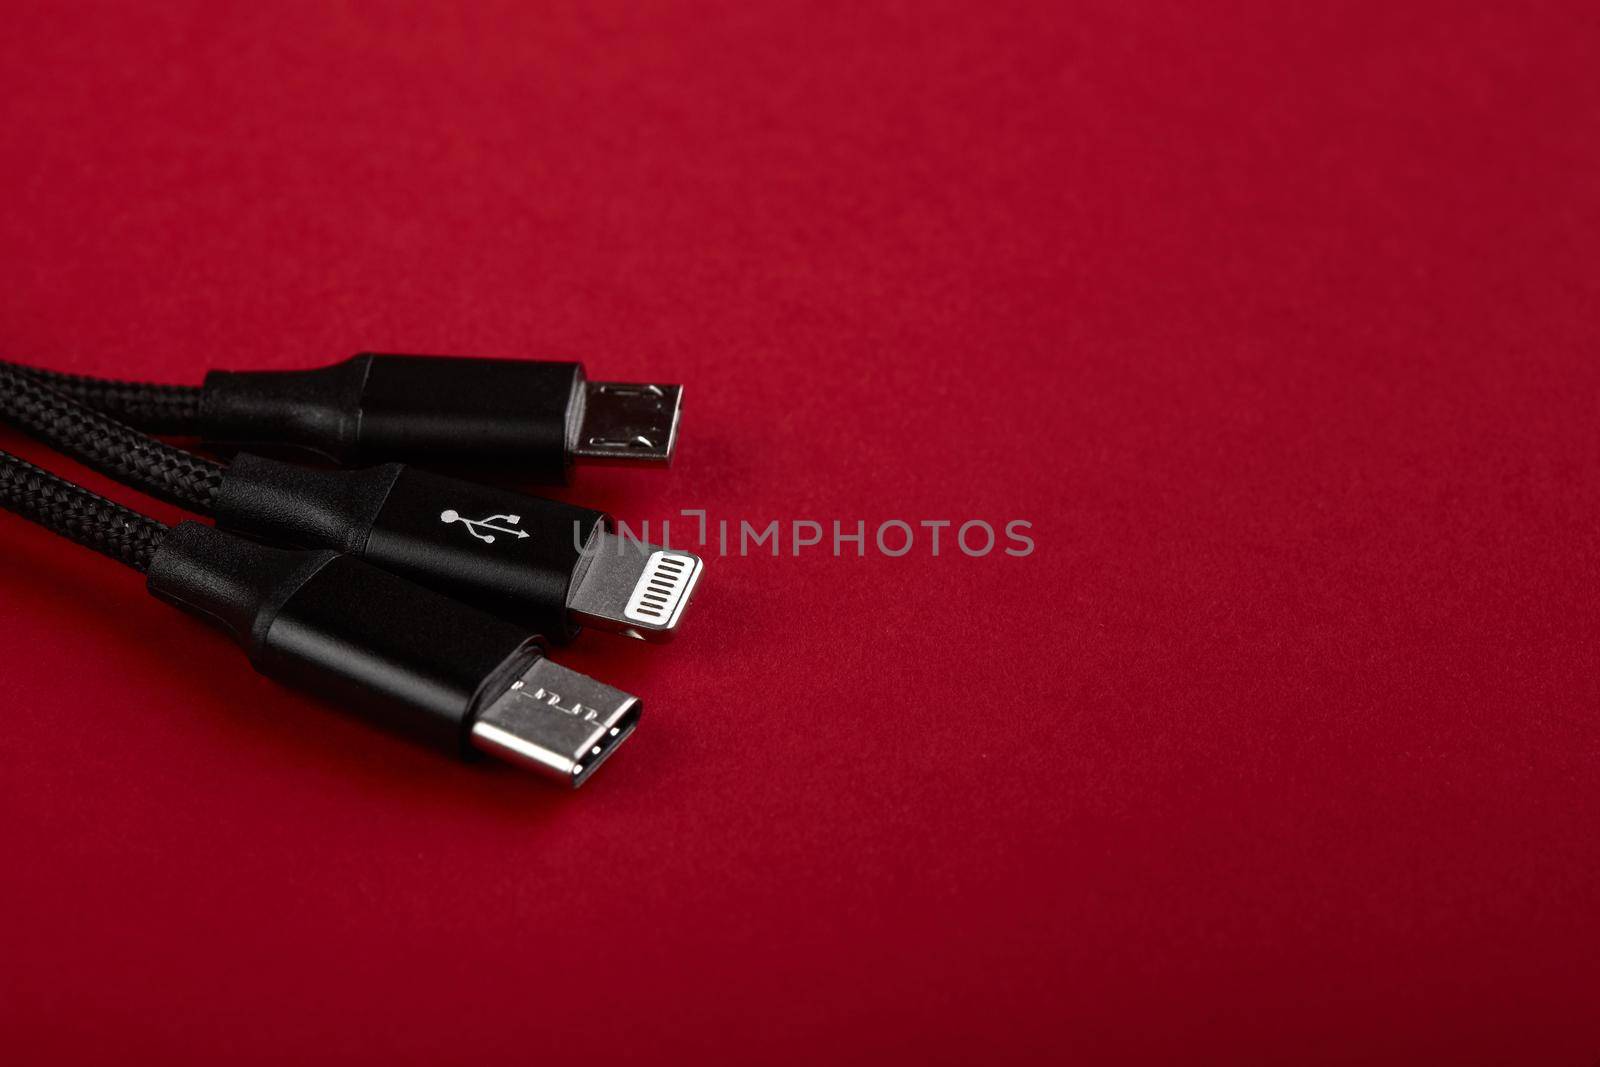 Closeup Shot of Universal USB Cable. 3 different cellphone usb charging plugs adapter from USB